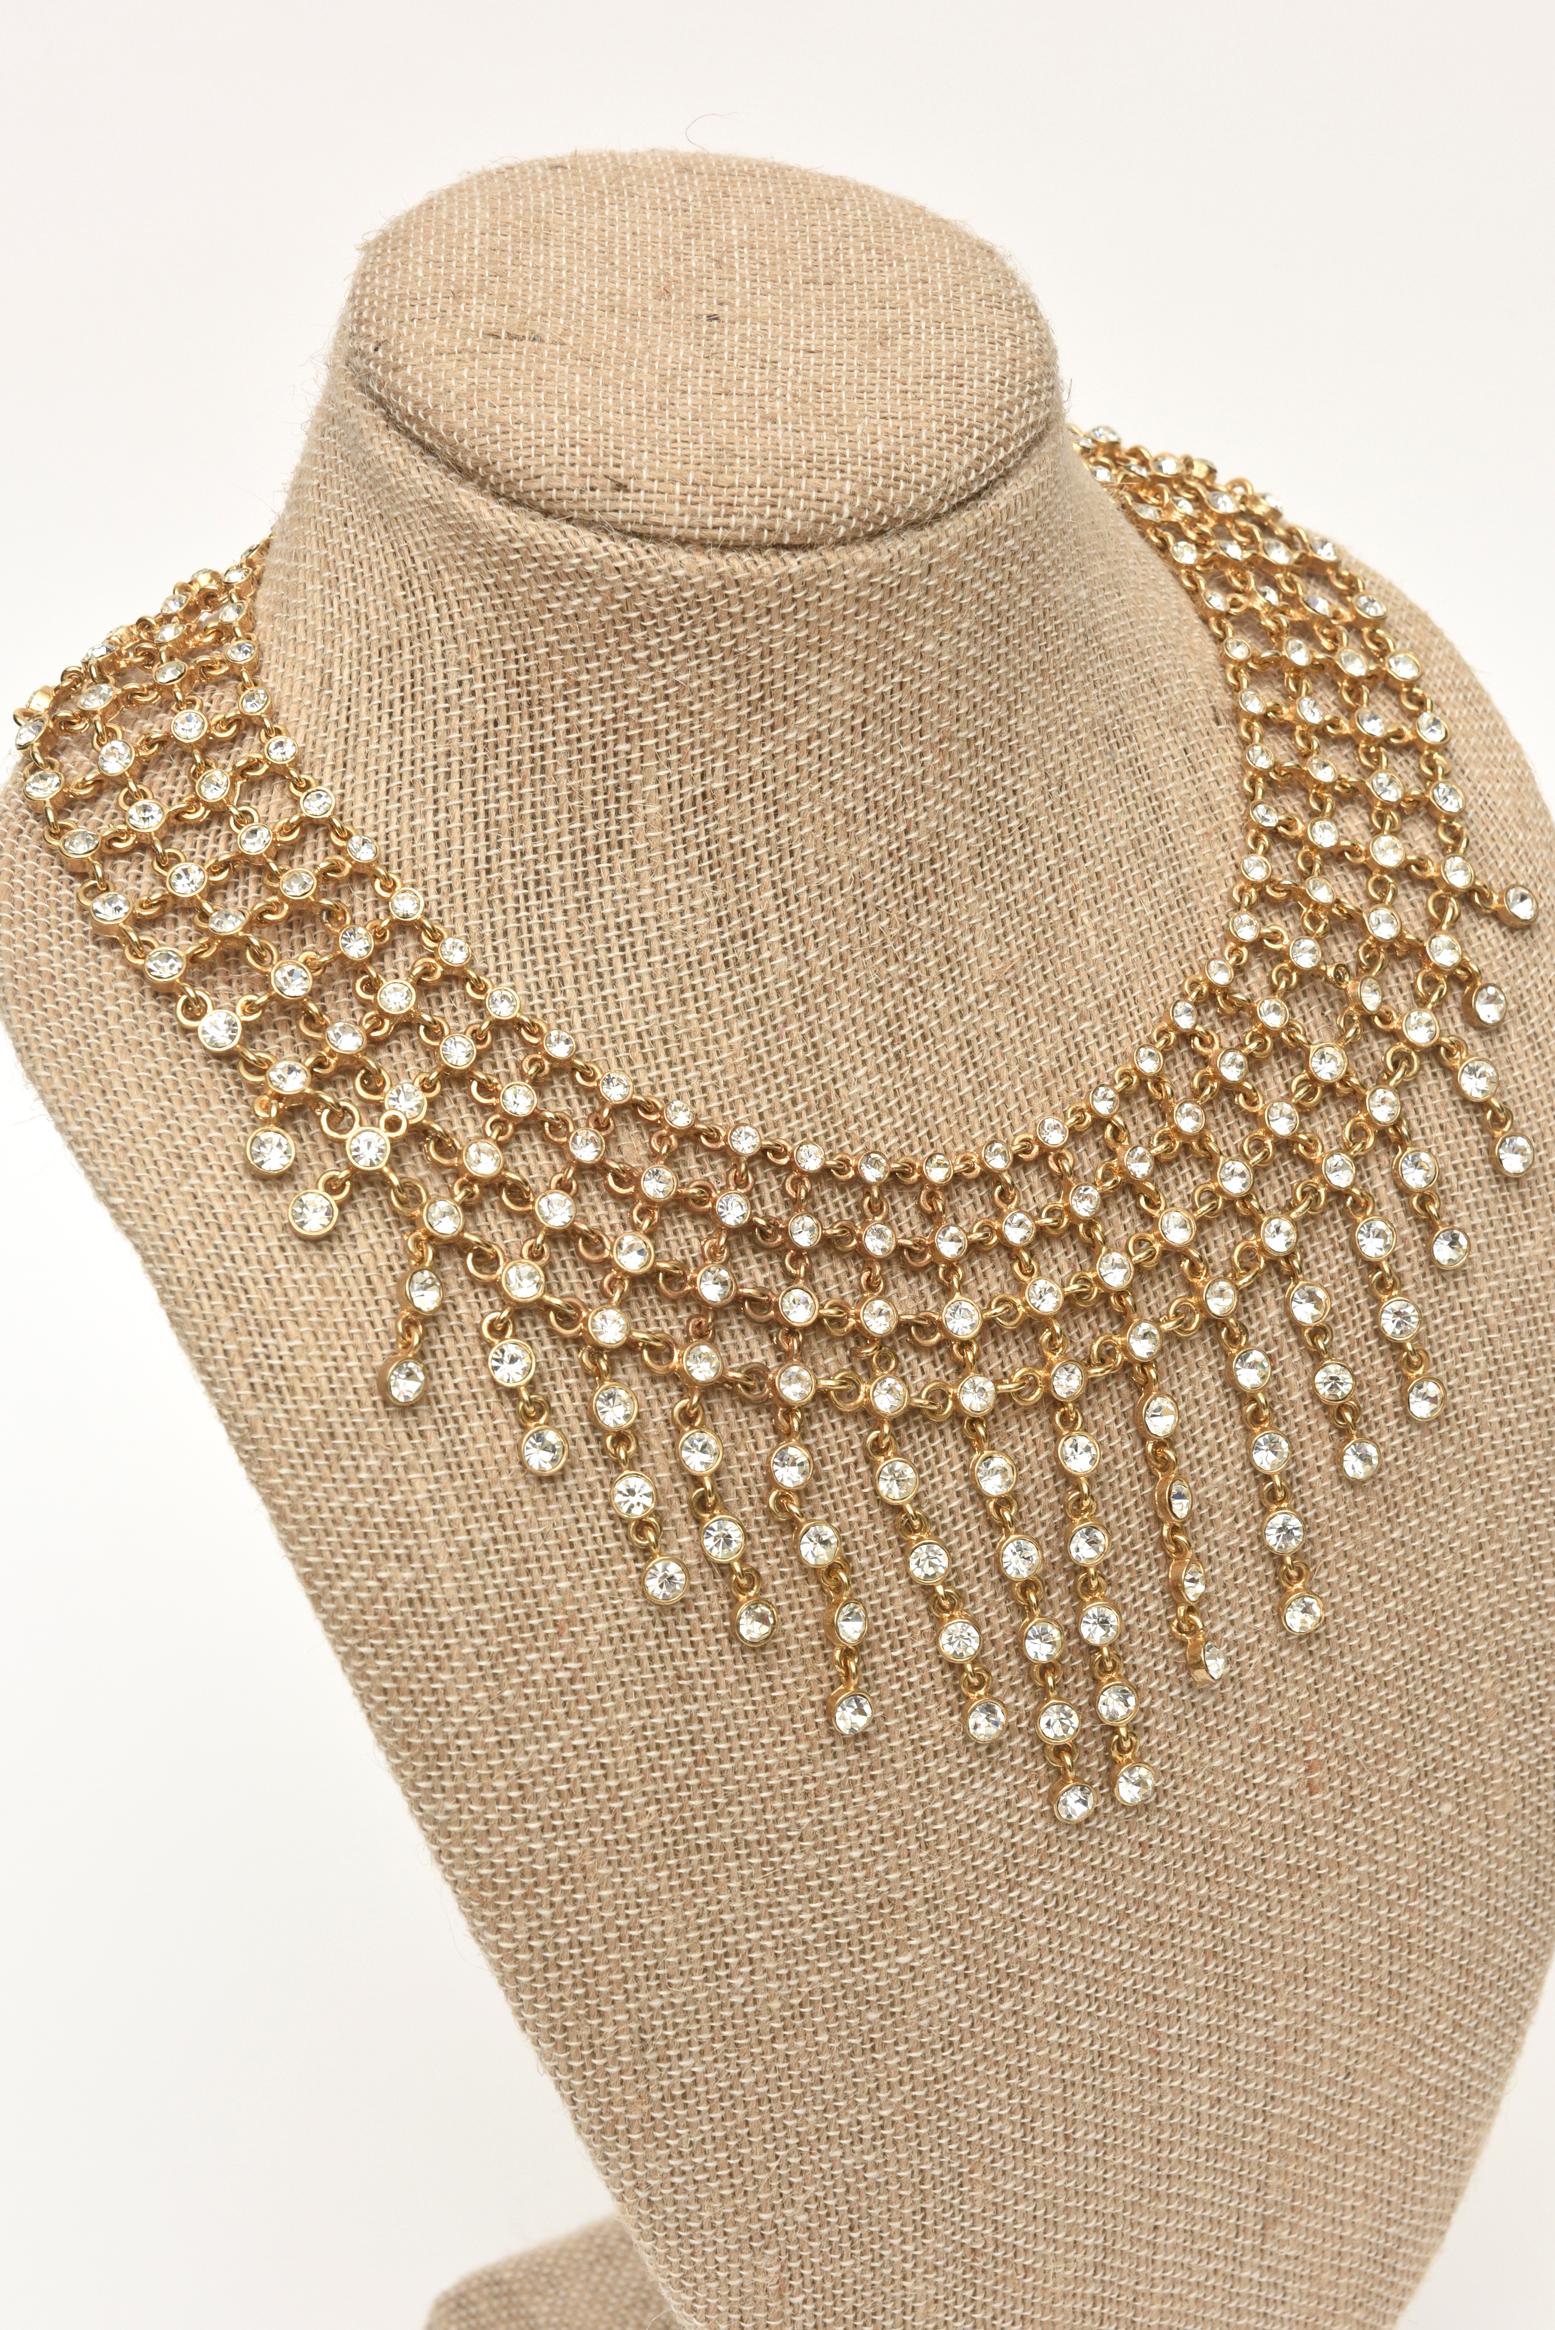  Rhinestone and Gilded Metal Bib Necklace Vintage For Sale 3